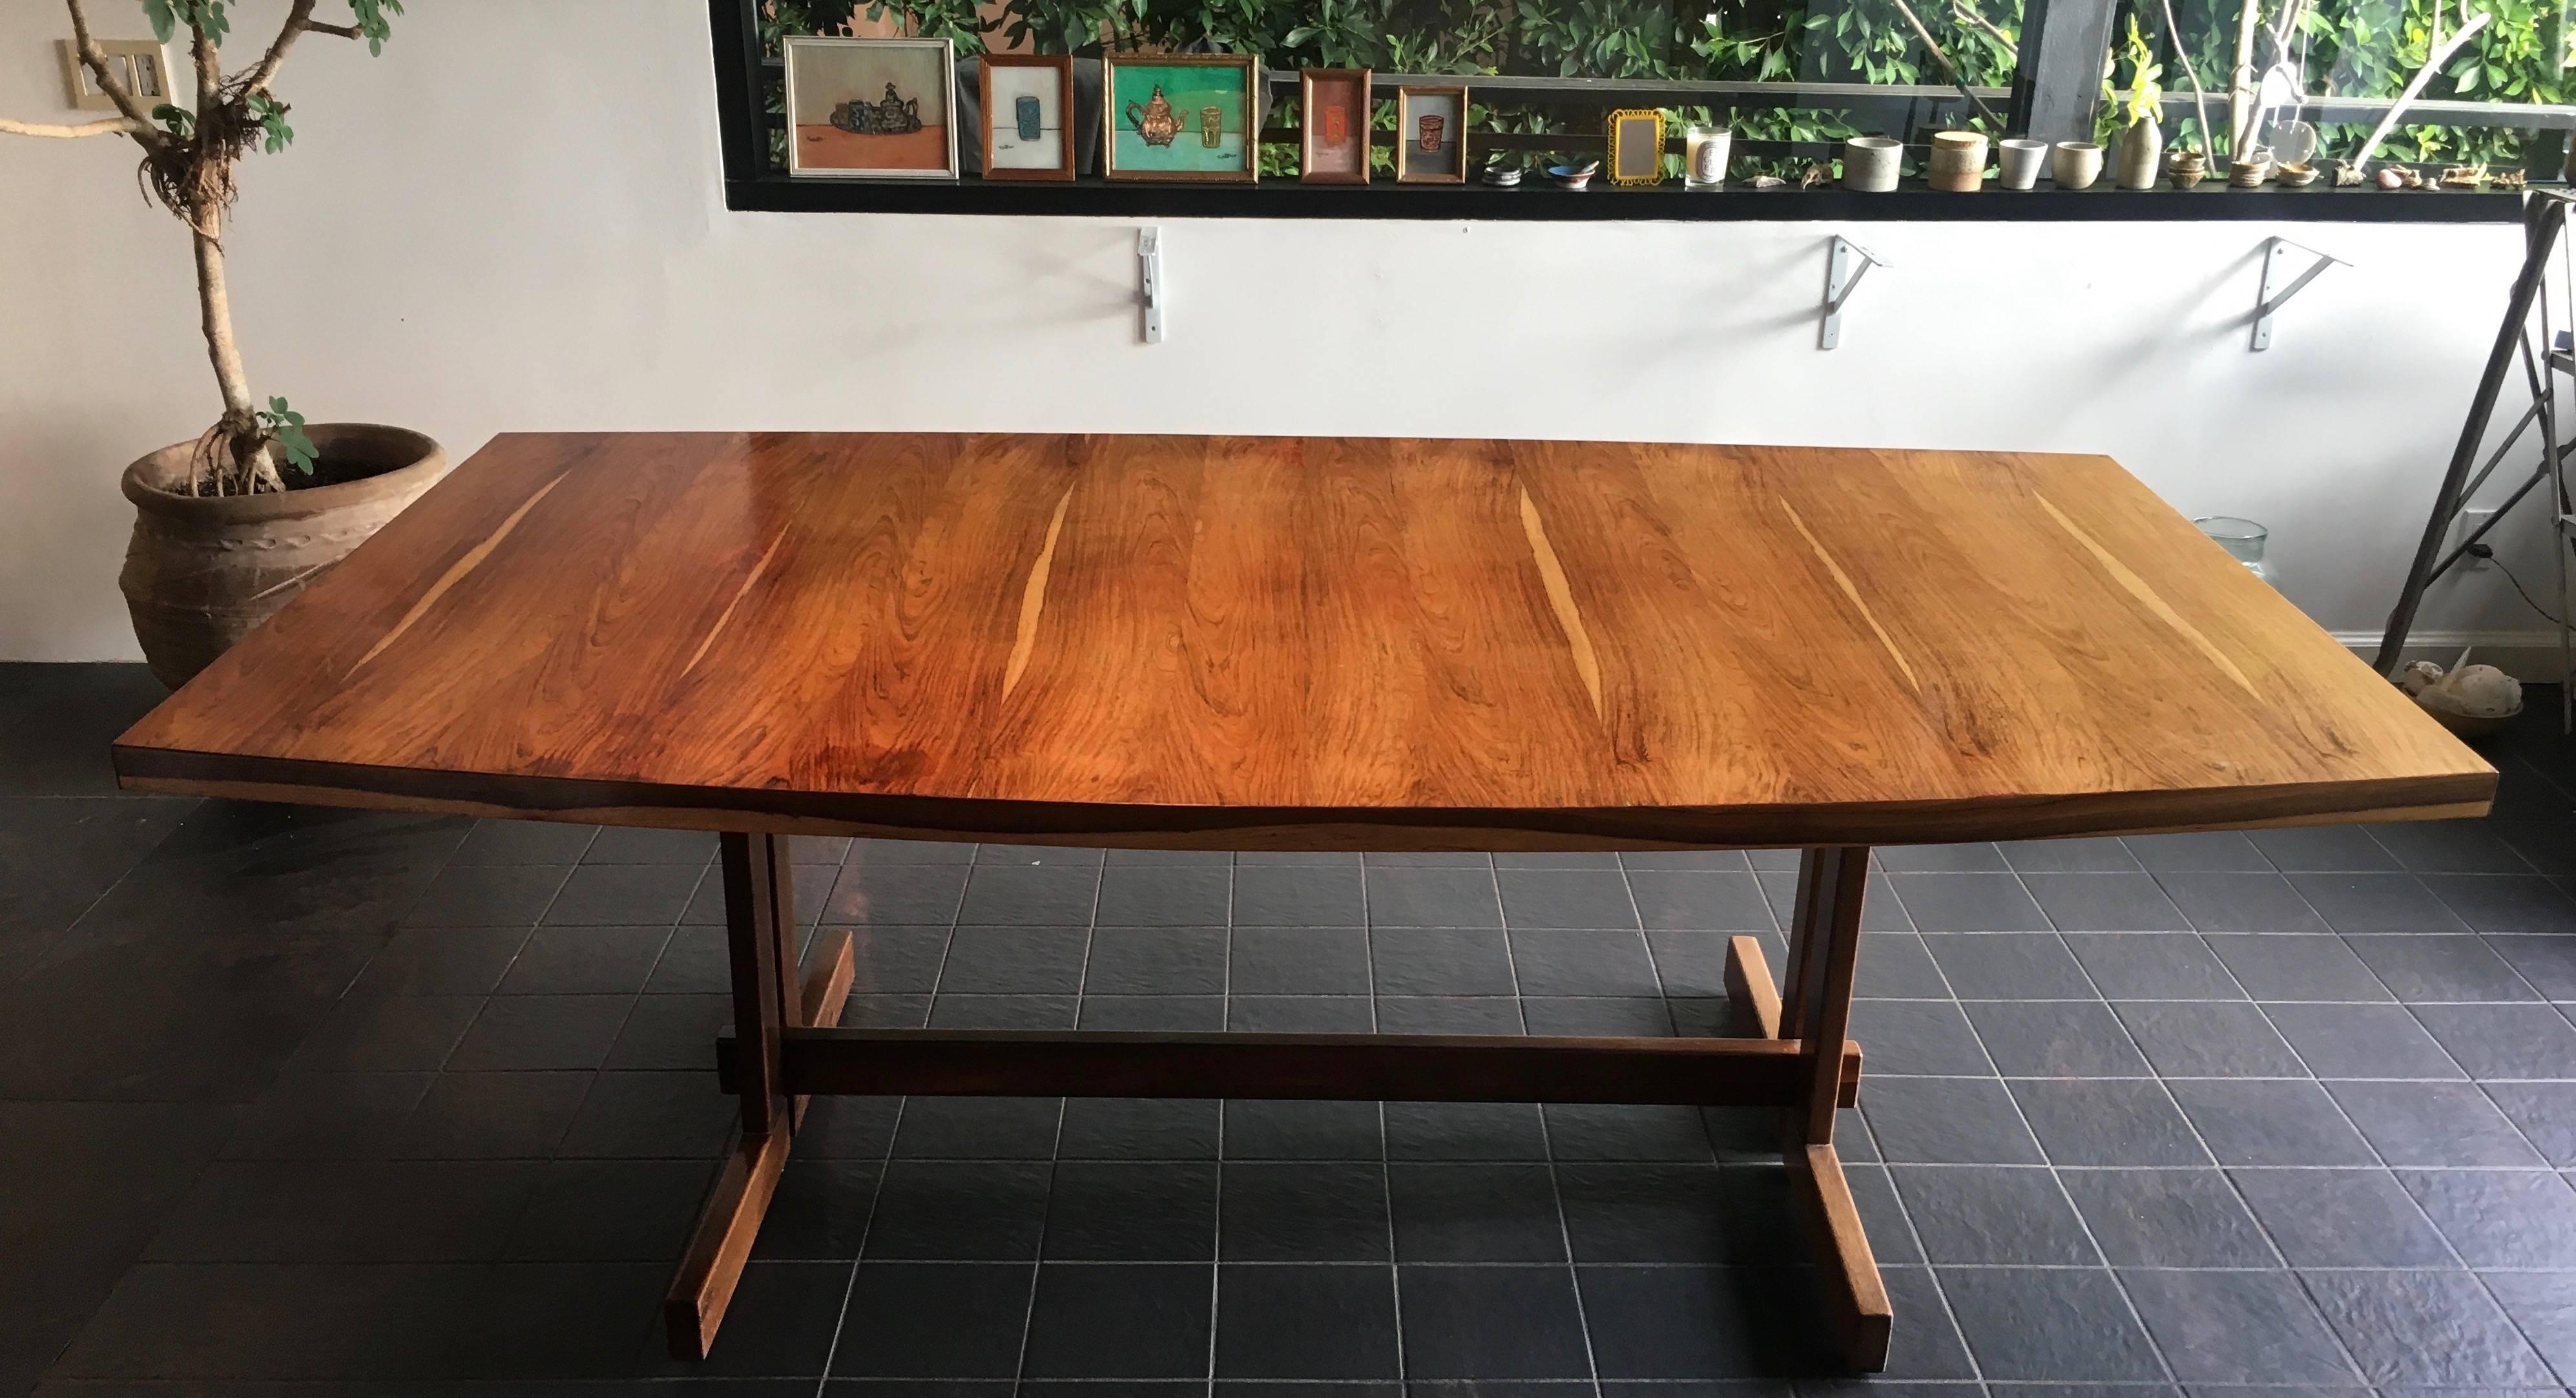 Brazilian Jacaranda dining table by Sergio Rodrigues, beautiful display of solidwood, stunning and exceptionally made. Perfect for dining and could be used as a large desk.